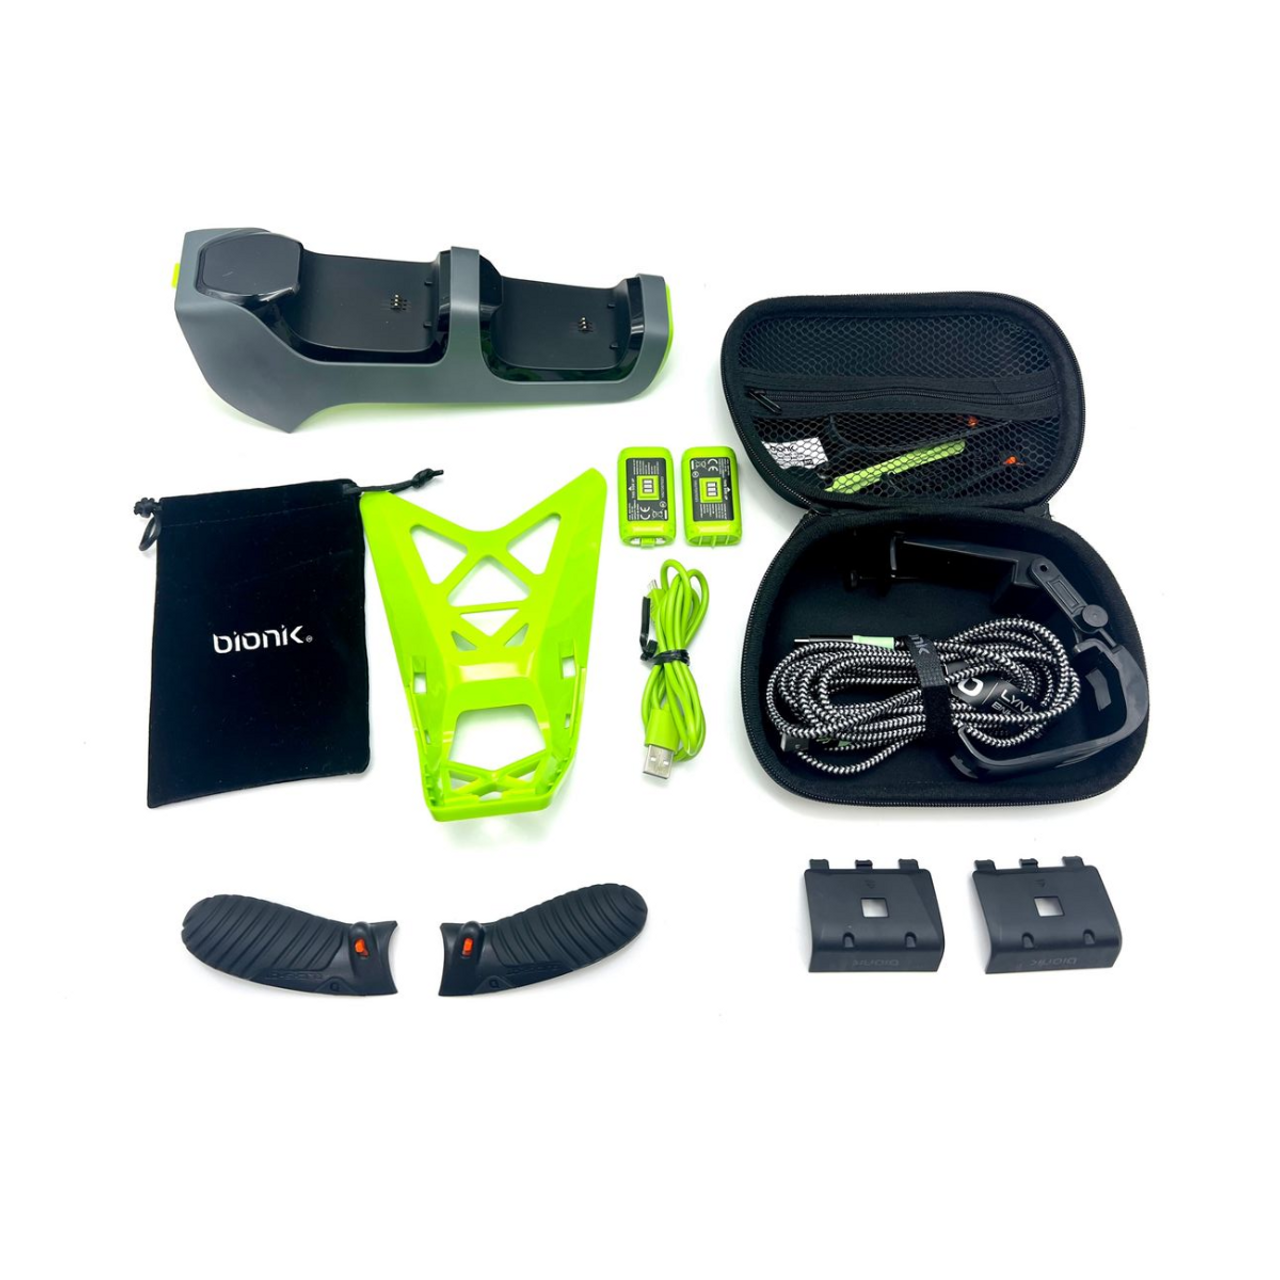 Bionik™ Xbox XS Pro Kit+ with Charger and Batteries product image